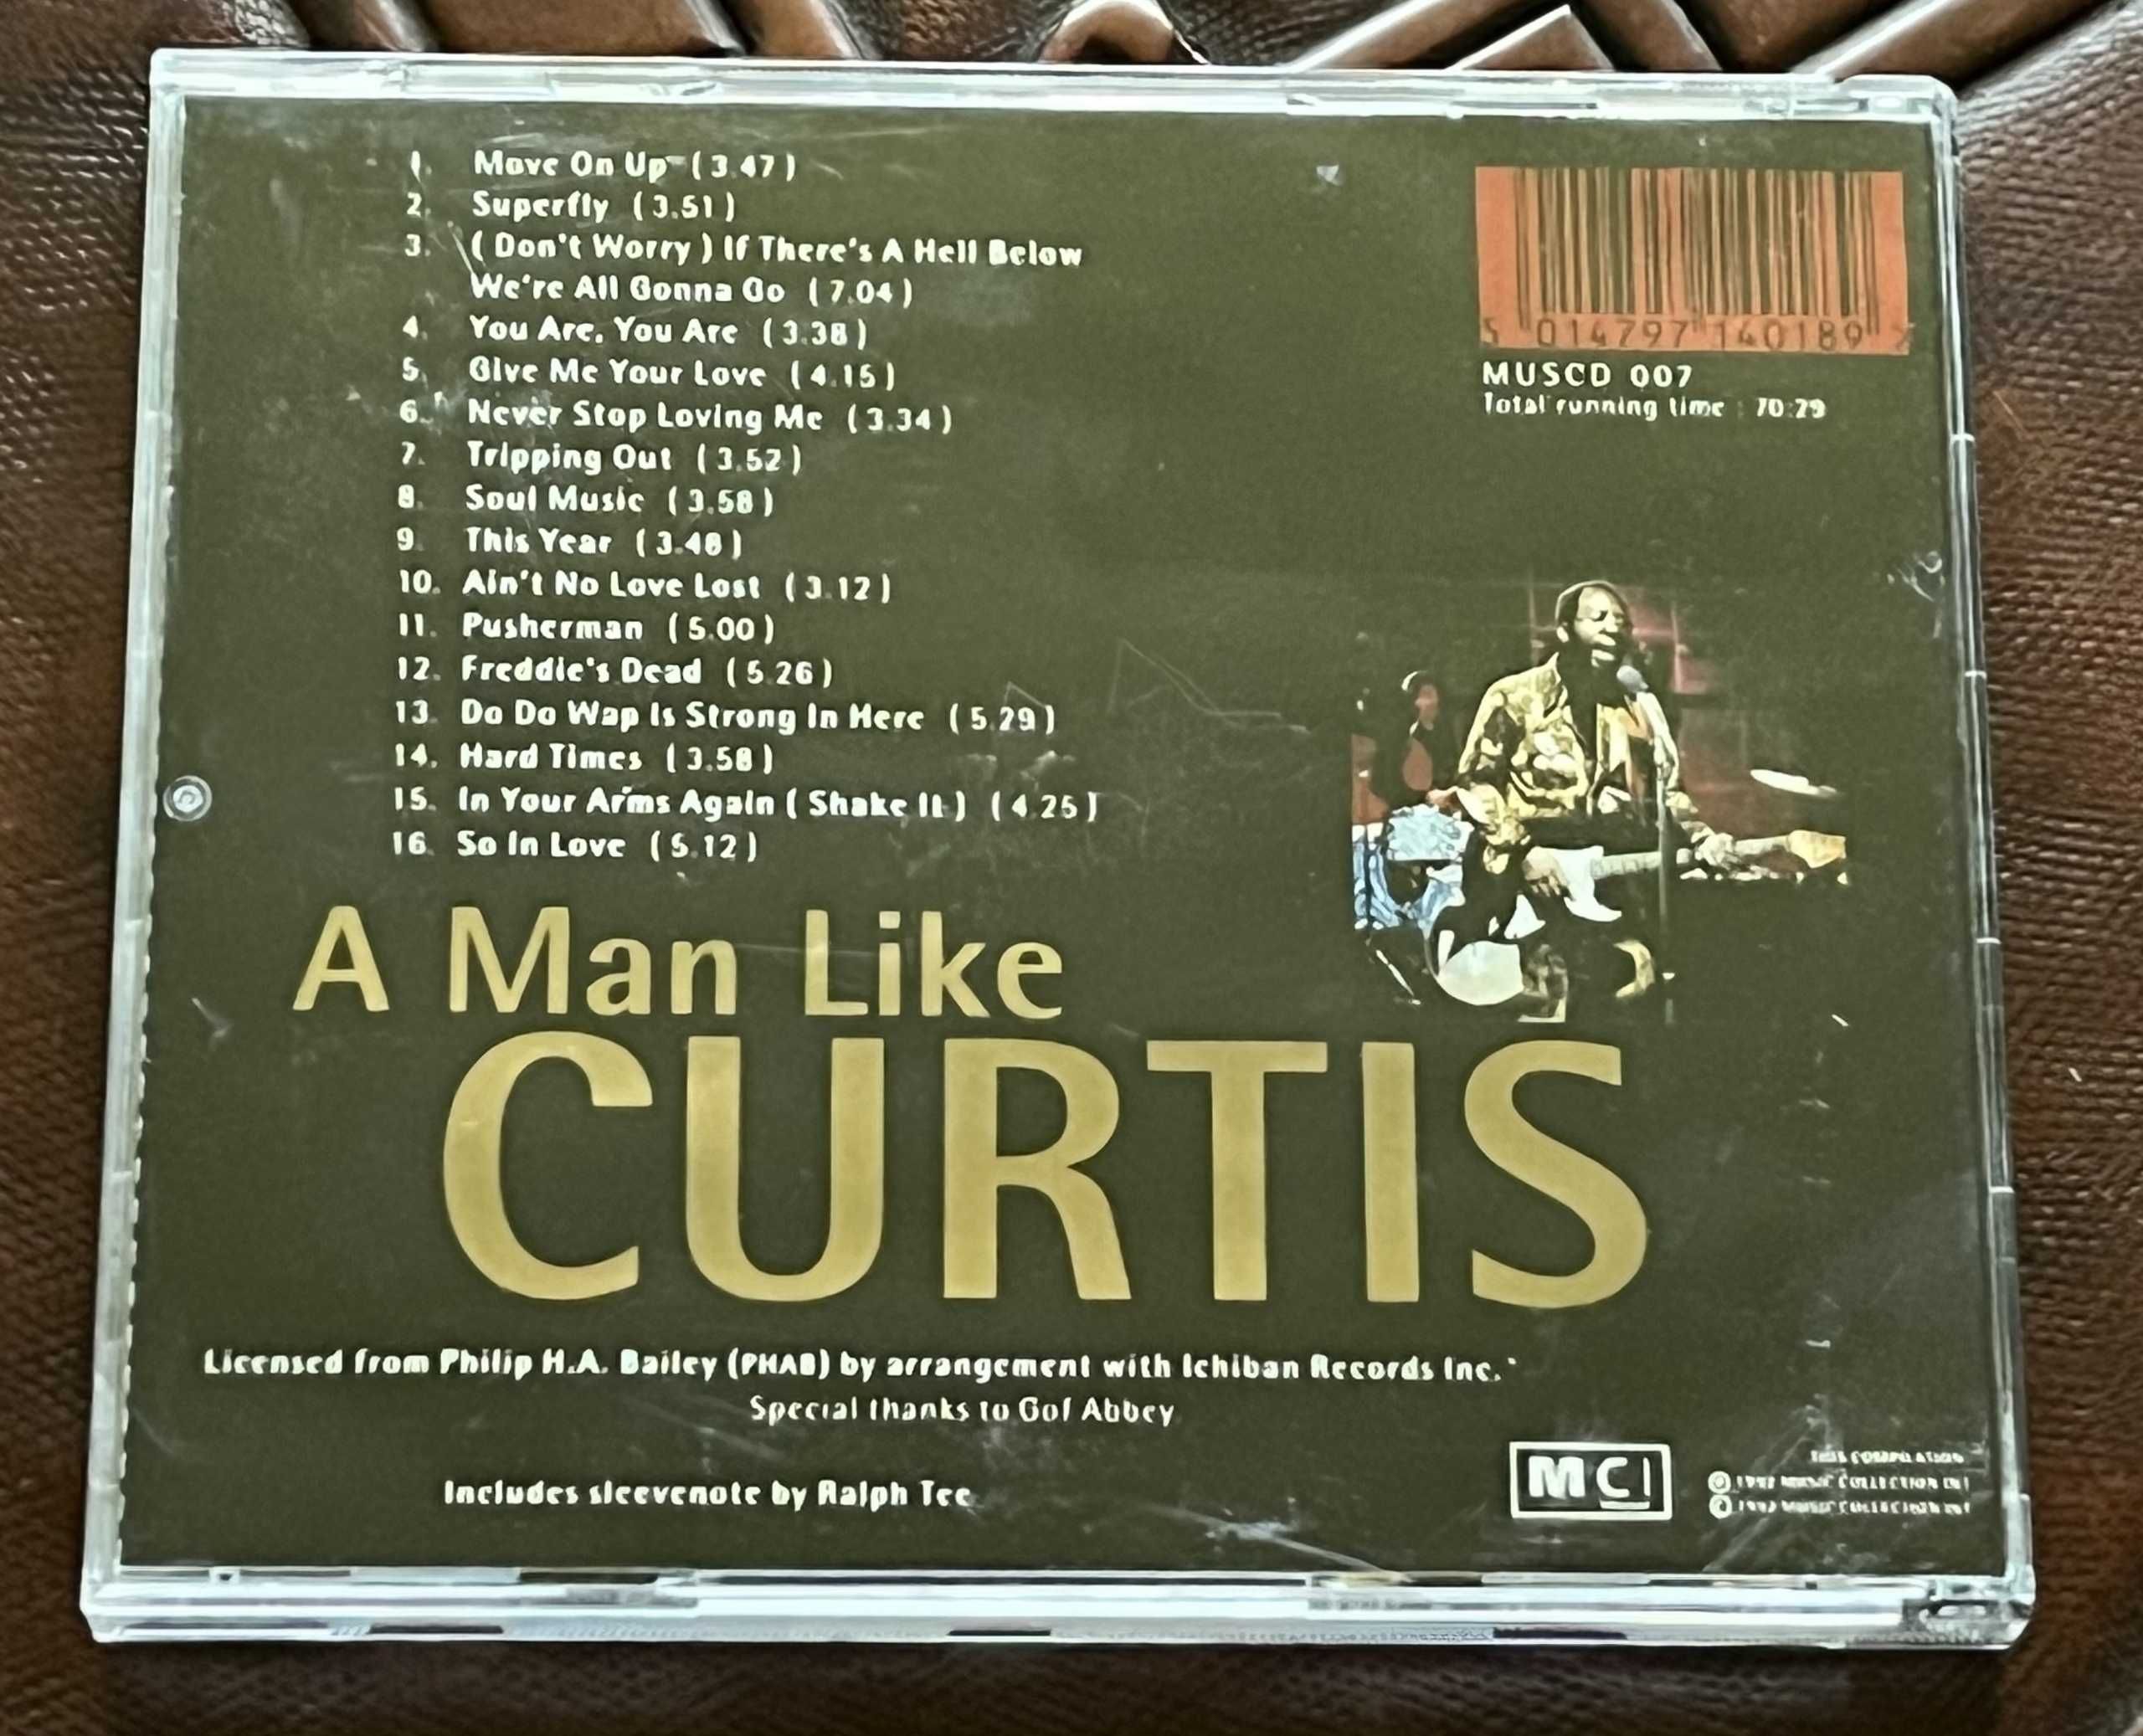 Curtis Mayfield - A Man Like Curtis - CD -EX+!